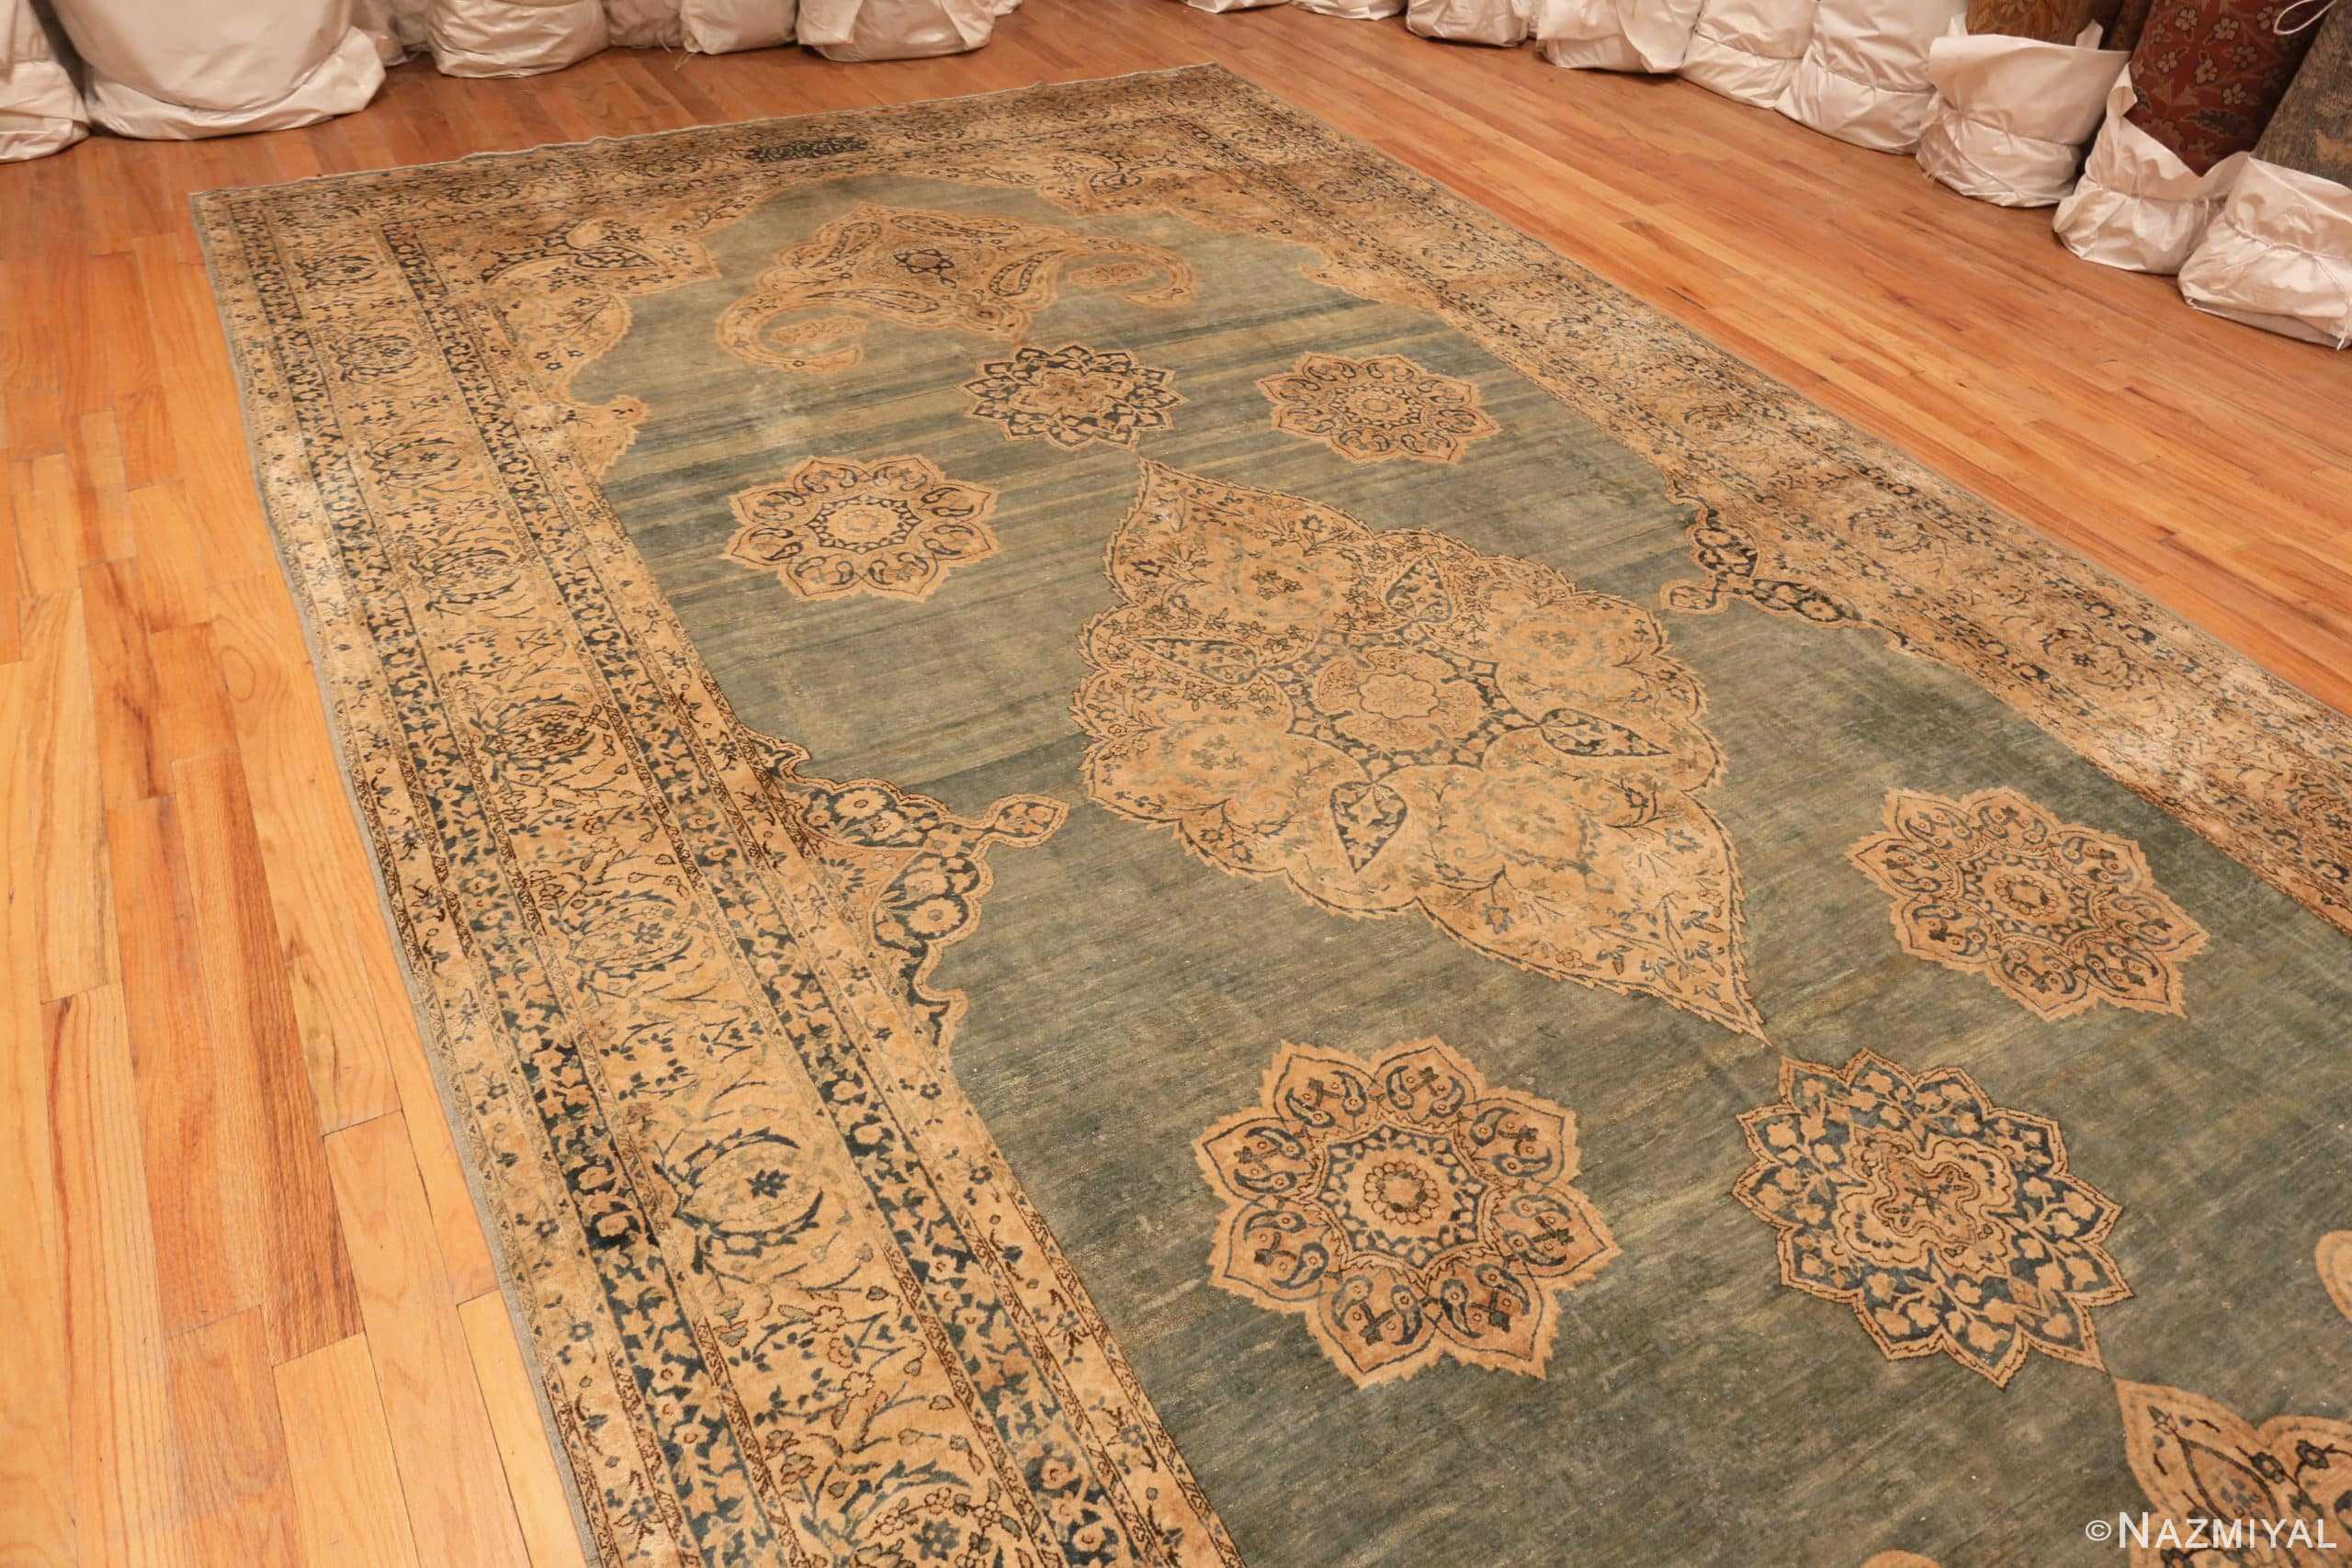 Side View Of Large Antique Persian Kerman Rug 71336 by Nazmiyal Antique Rugs